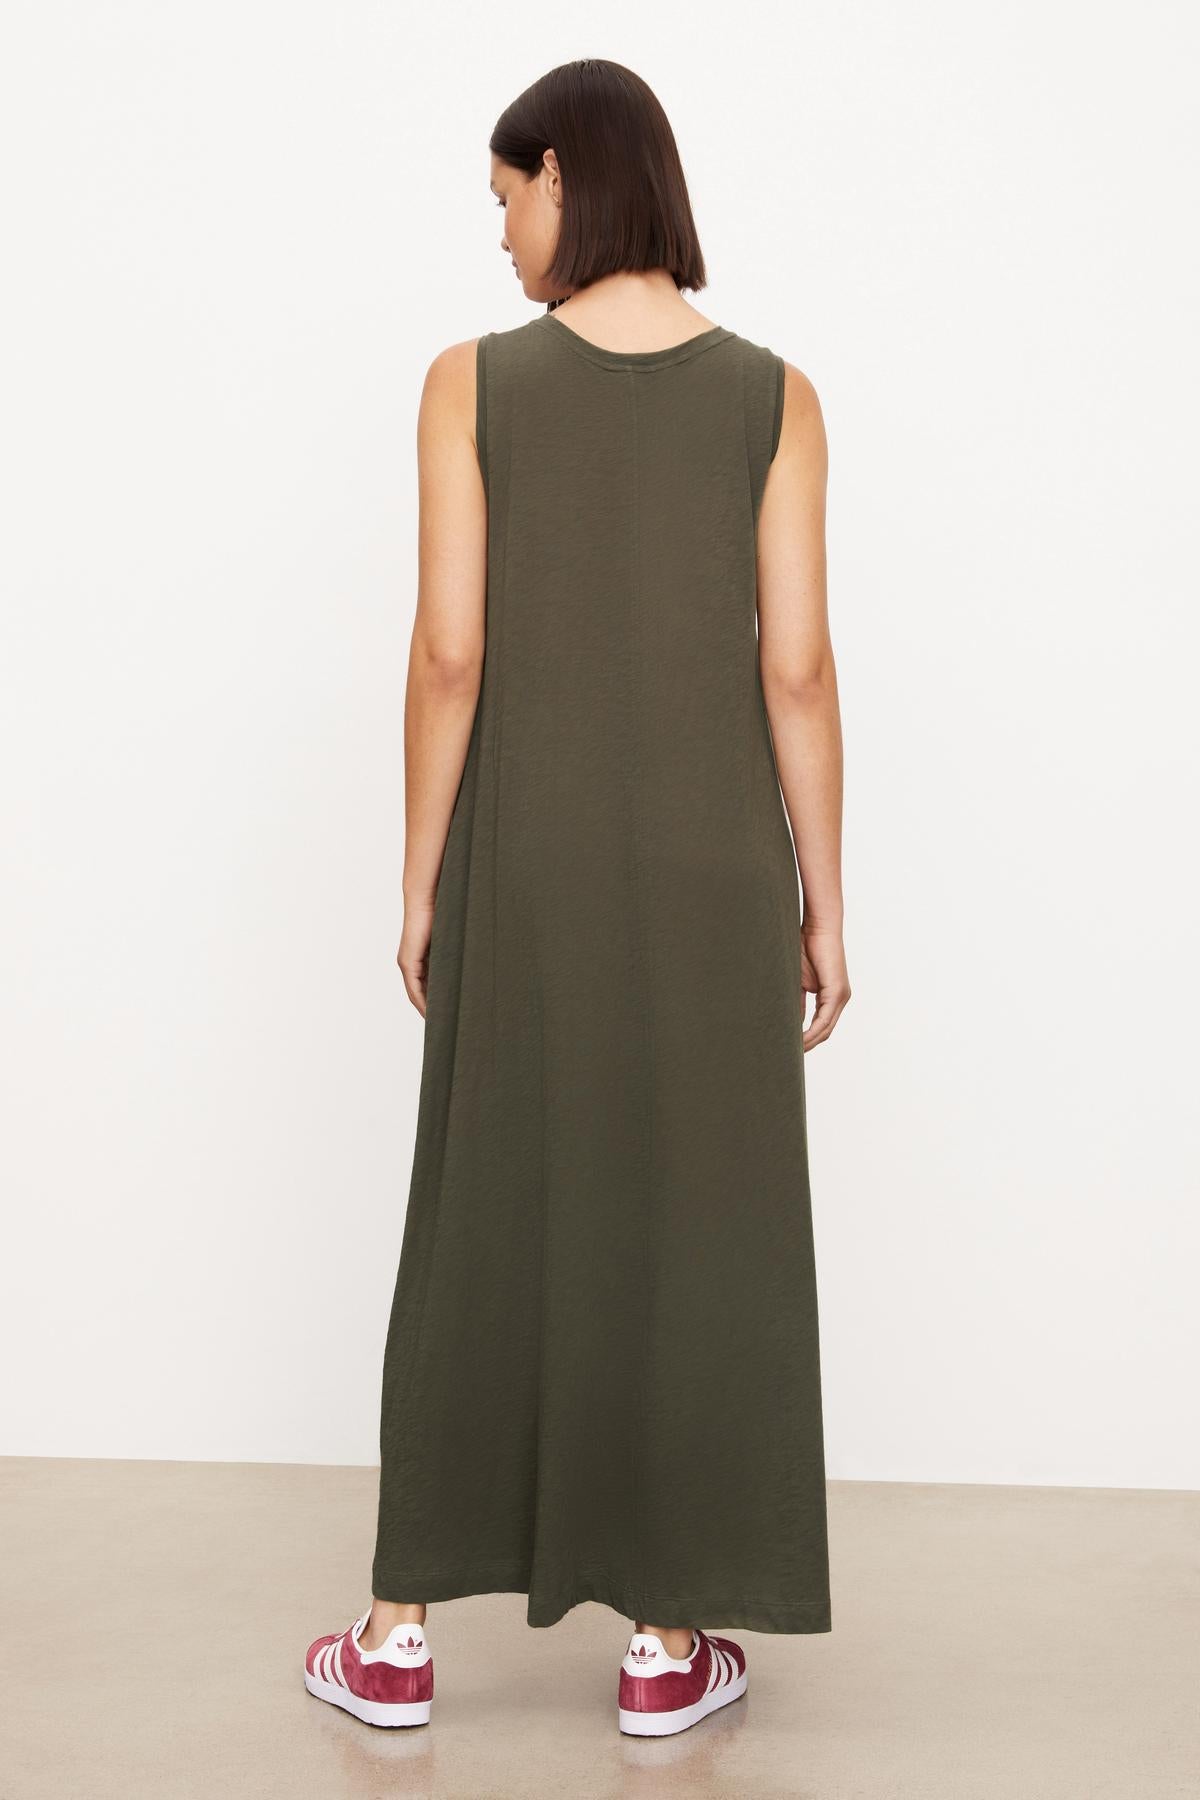 The back view of a woman wearing a green sleeveless Velvet by Graham & Spencer EDITH SLEEVELESS MAXI DRESS.-35701765931201